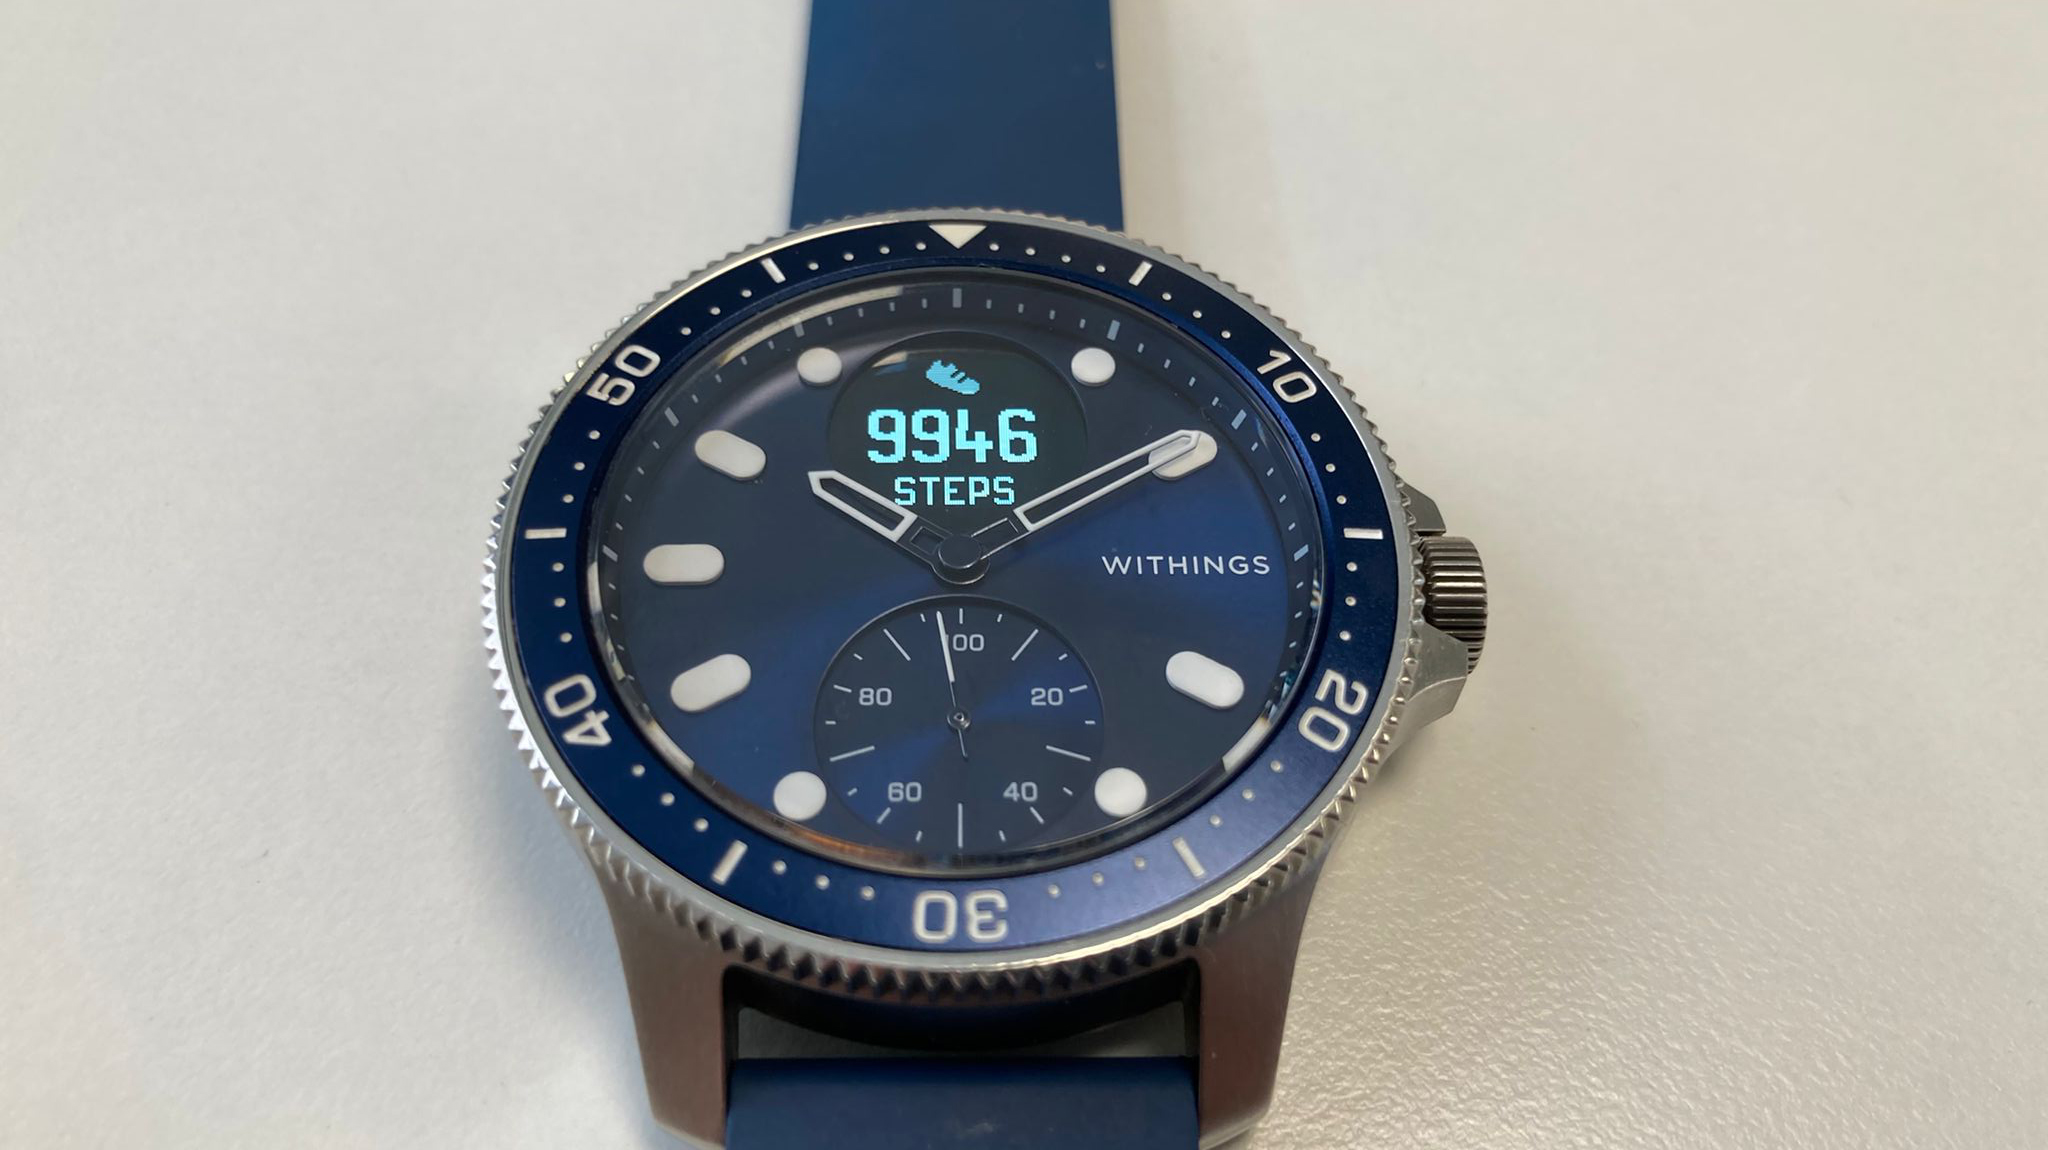 Withings ScanWatch Horizon laid down on table